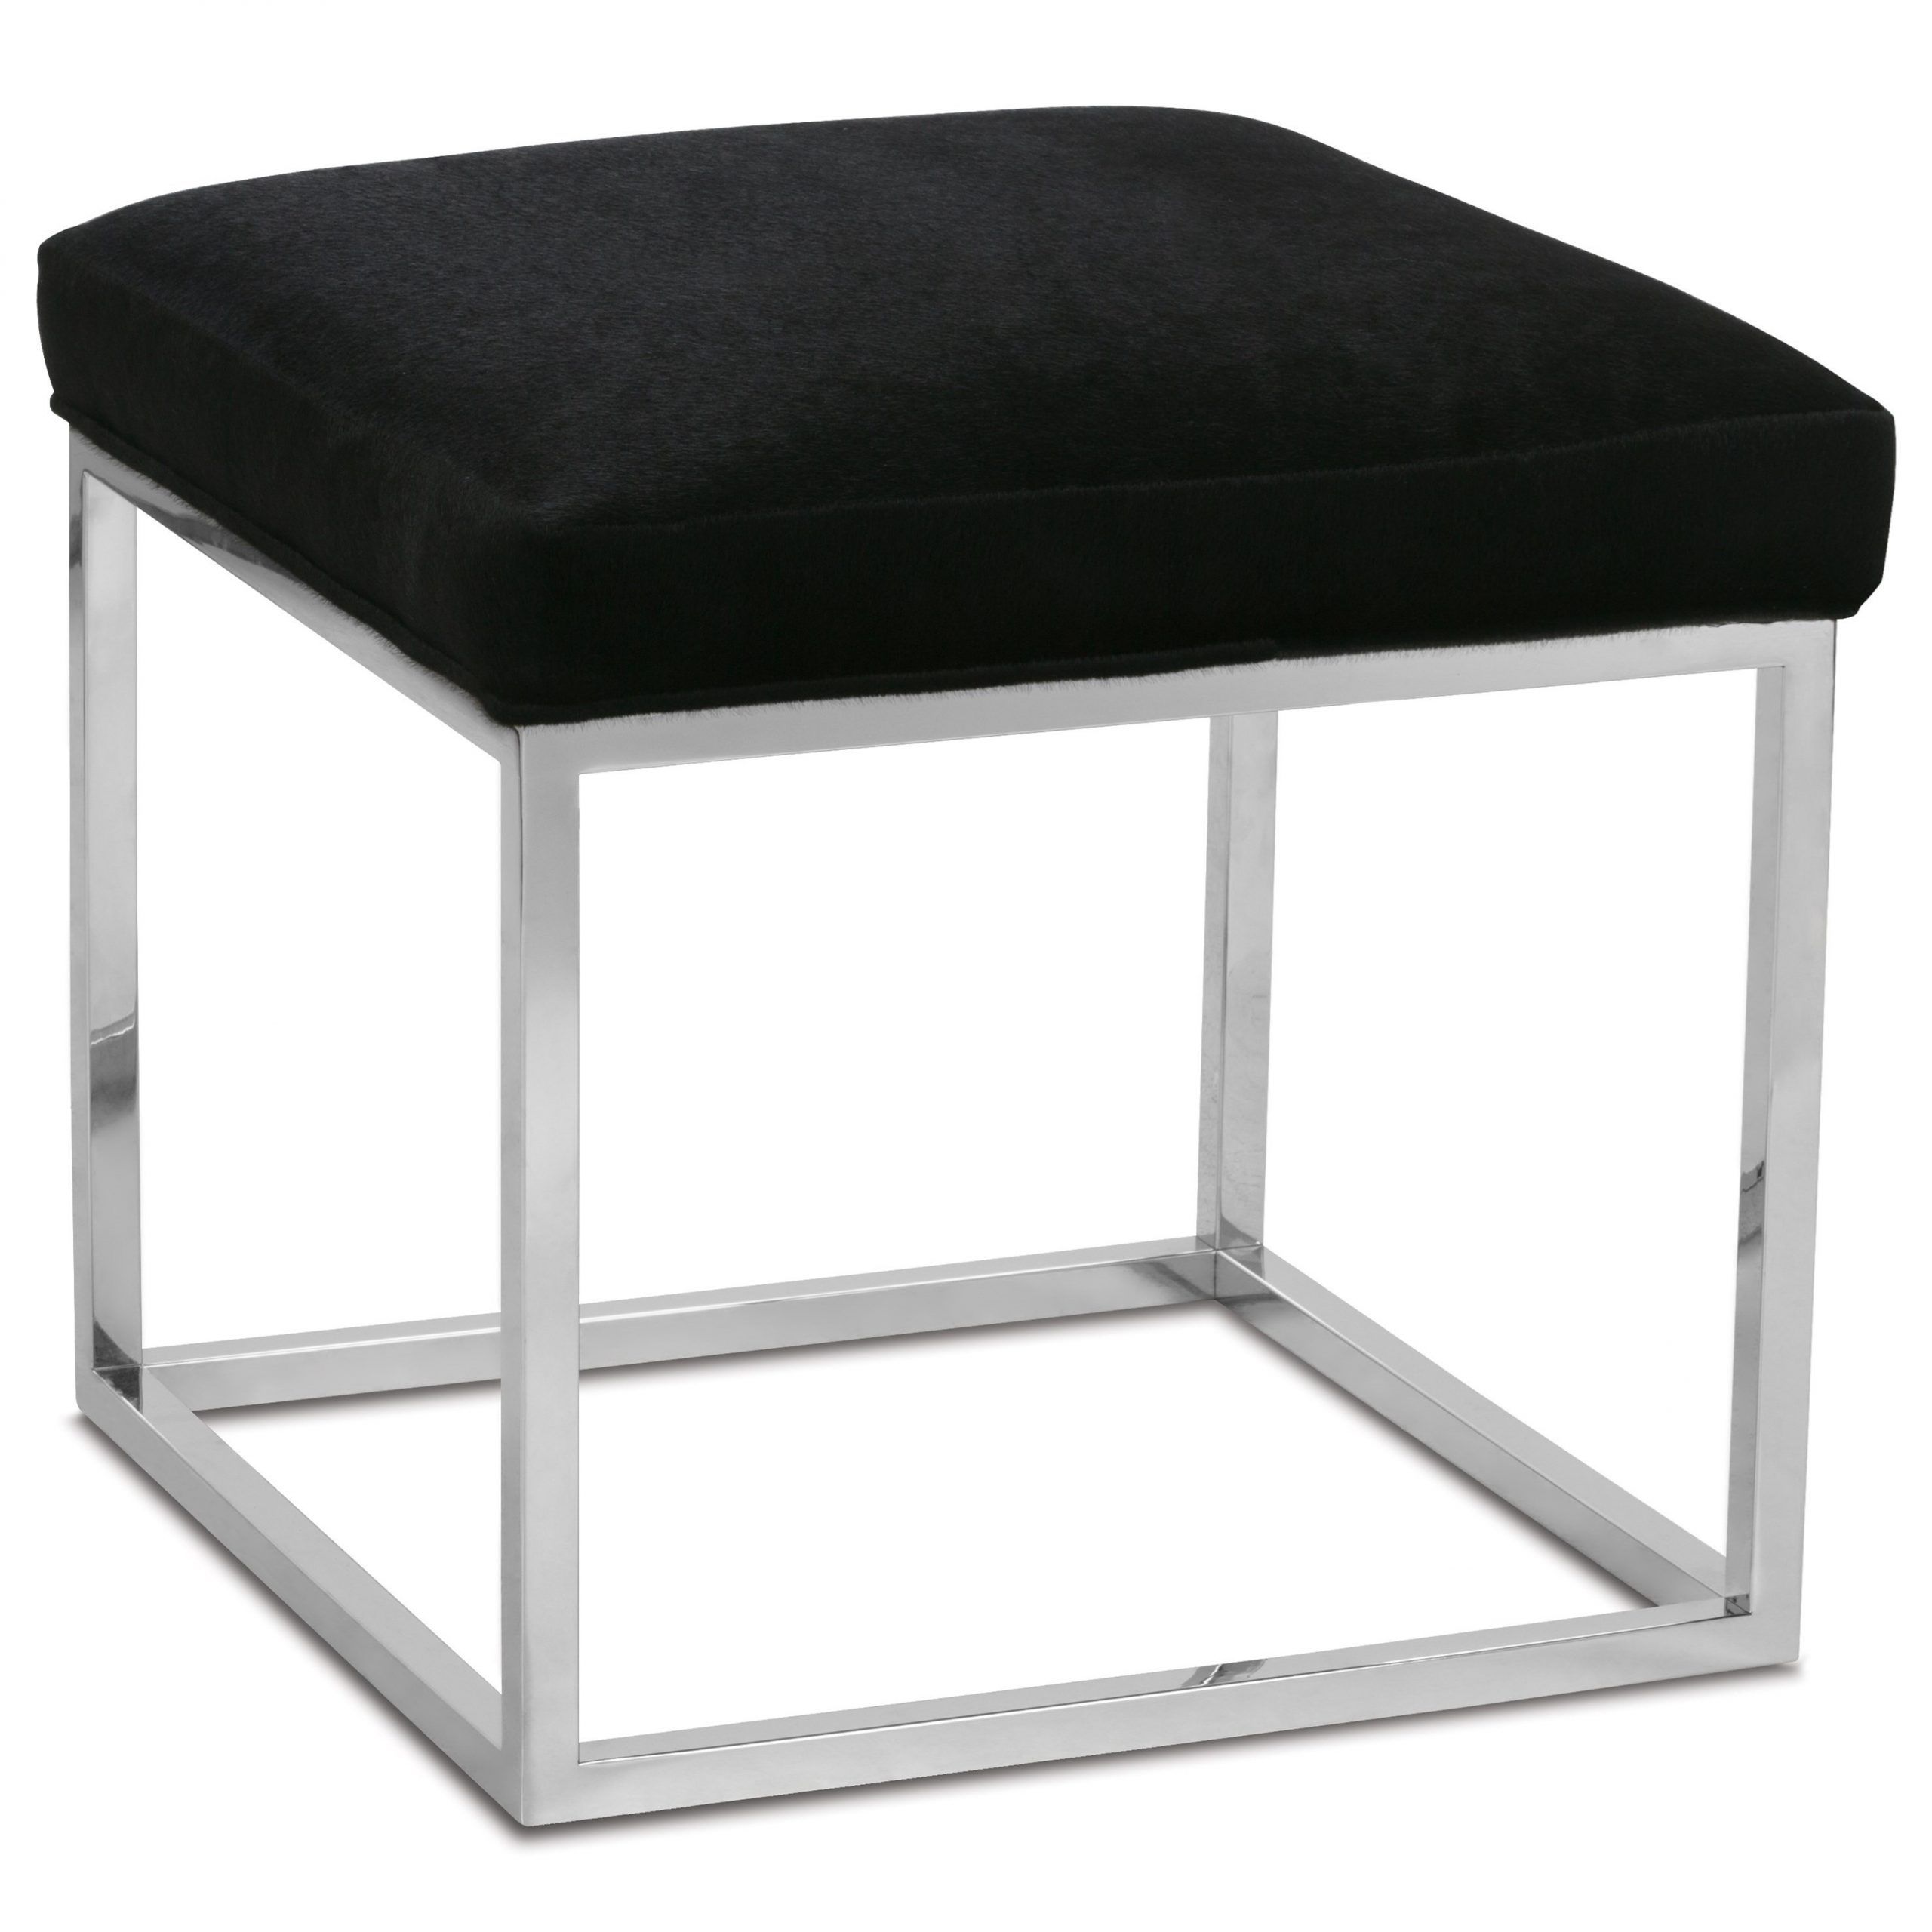 Rowe Percy Contemporary Accent Cube Ottoman With Metal Frame | Reeds Inside Chrome Metal Ottomans (View 14 of 20)